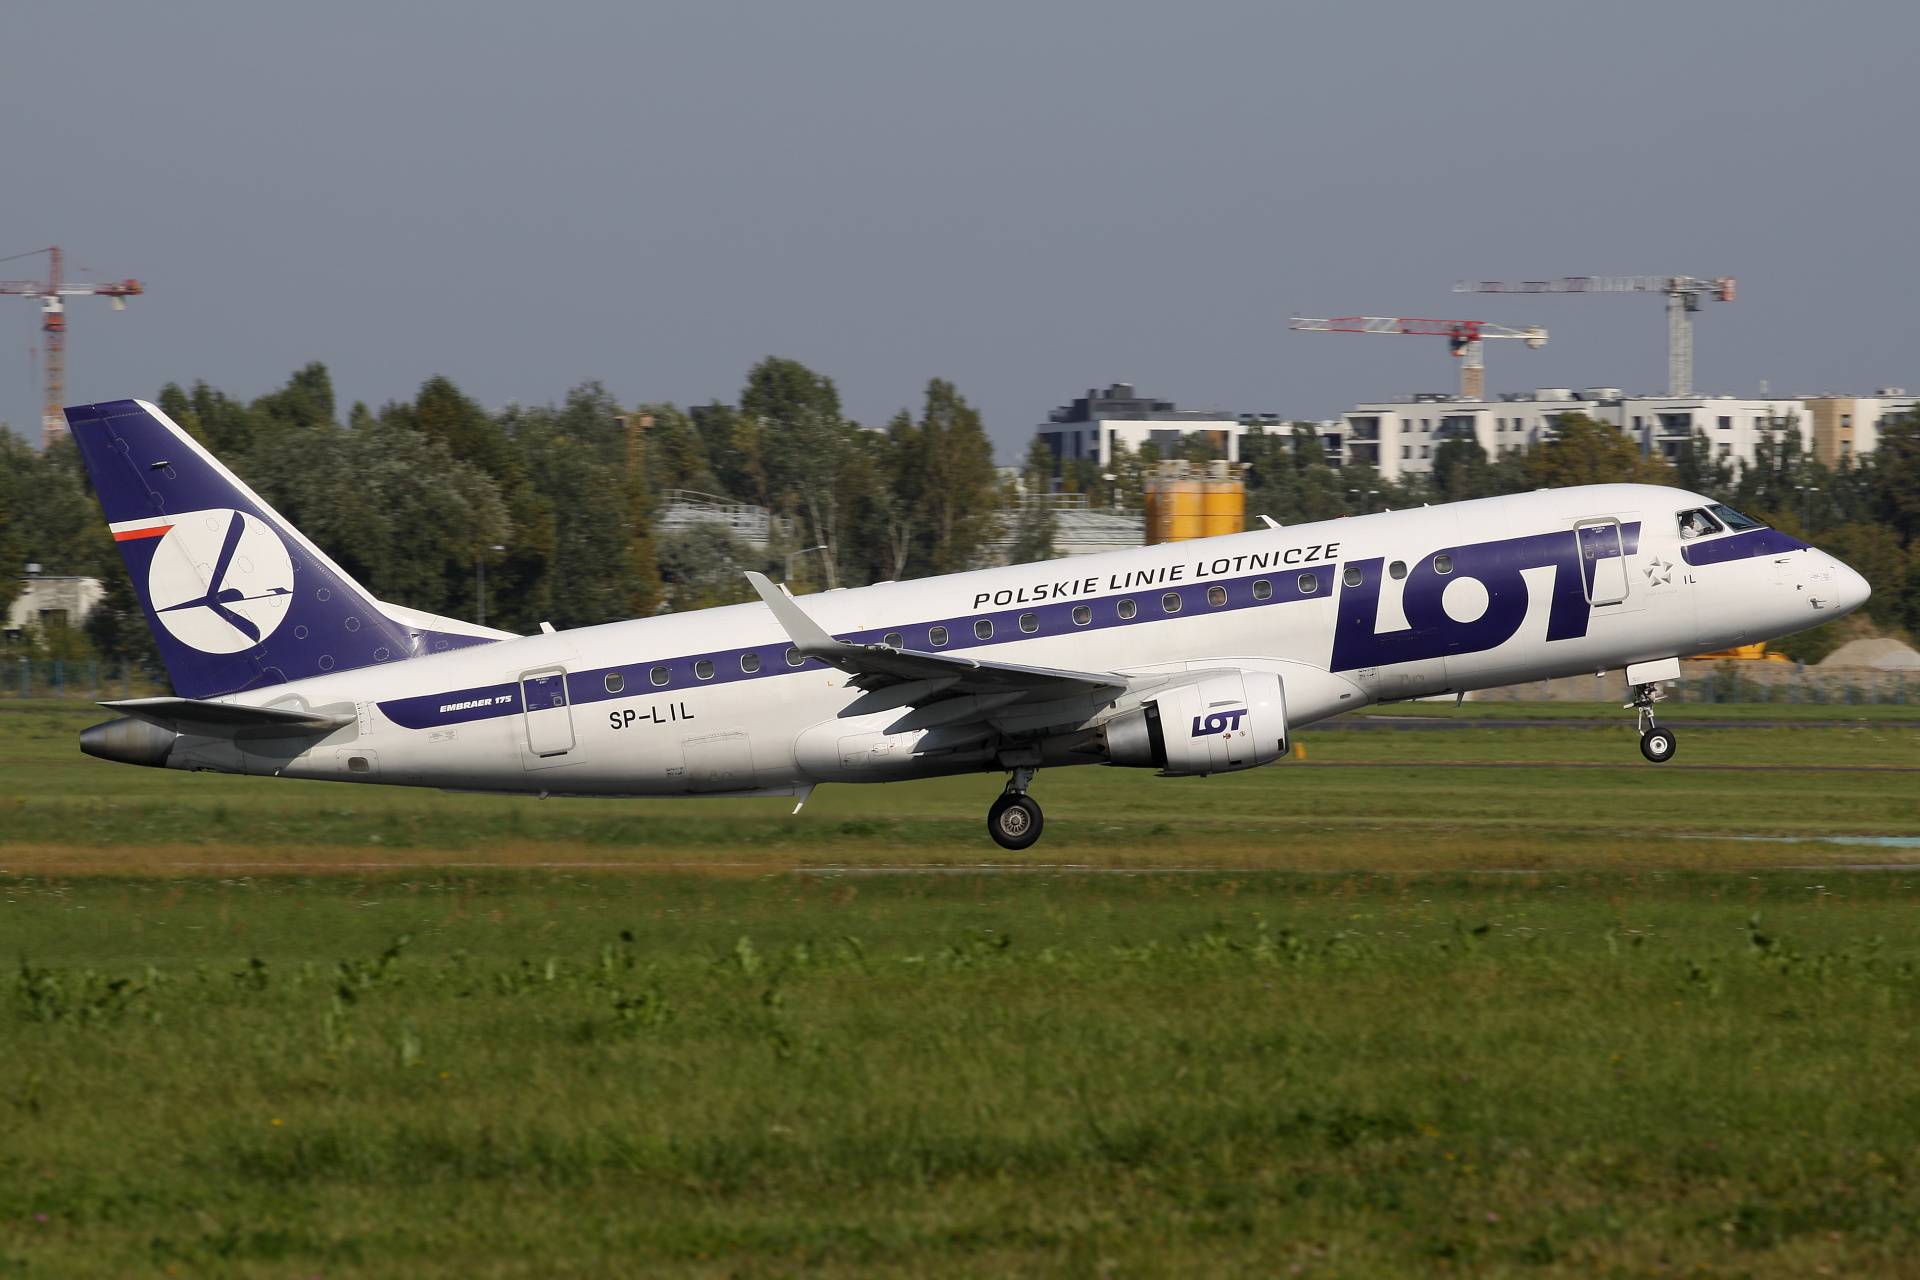 SP-LIL (Aircraft » EPWA Spotting » Embraer E175 » LOT Polish Airlines)